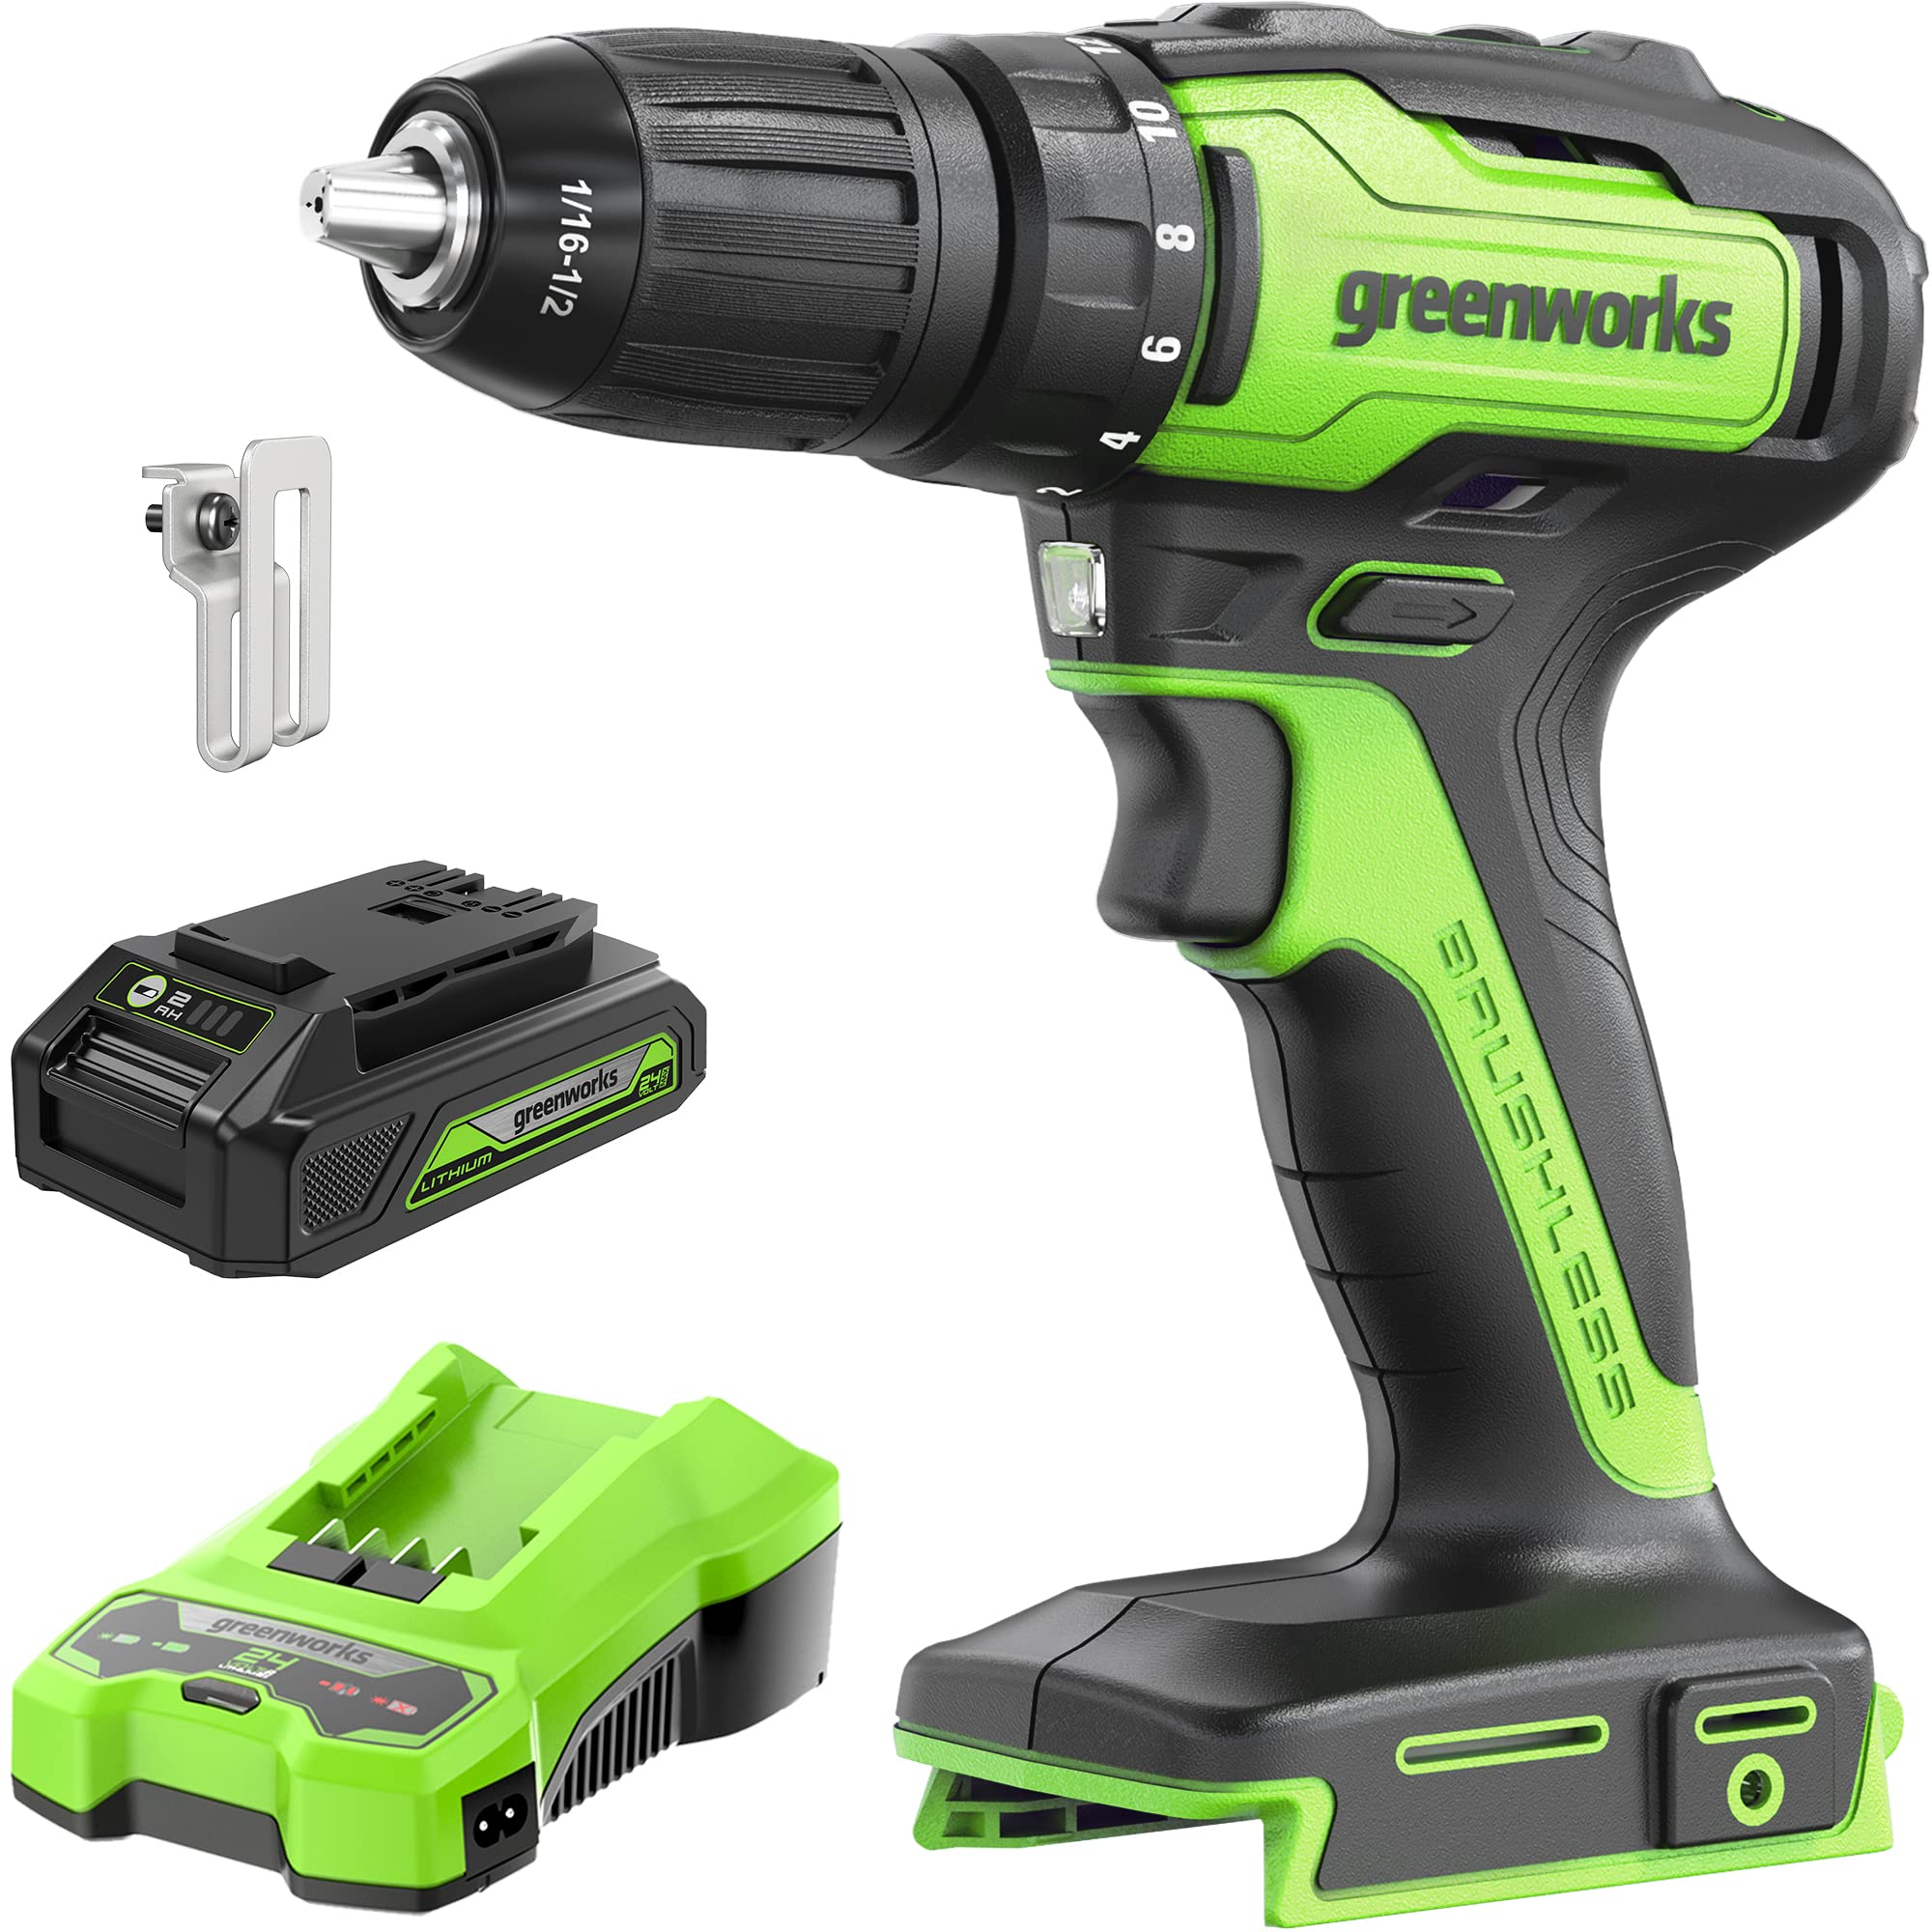 Greenworks 24V Brushless Drill Driver w/ 2Ah USB Battery & Charger $48.69 + Free Shipping